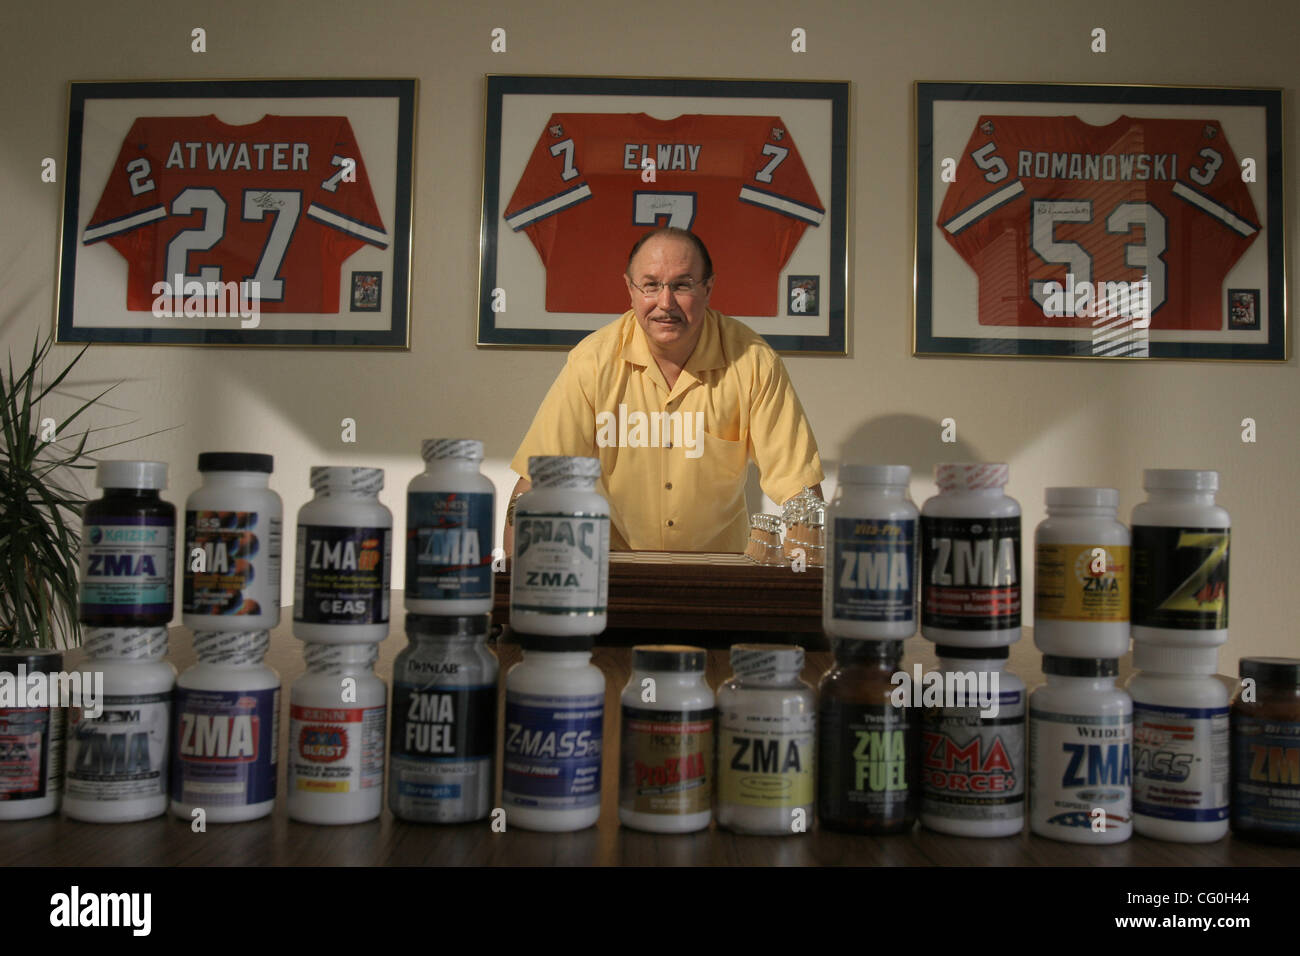 Jun 29, 2007 - Bulingame, California, USA - BALCO founder VICTOR CONTE in an office of his new company. His current line of performance enhancing supplements are featured in the foreground and signed athletic jerseys hang behind. (Credit Image: © Martin Klimek/ZUMA Press) Stock Photo